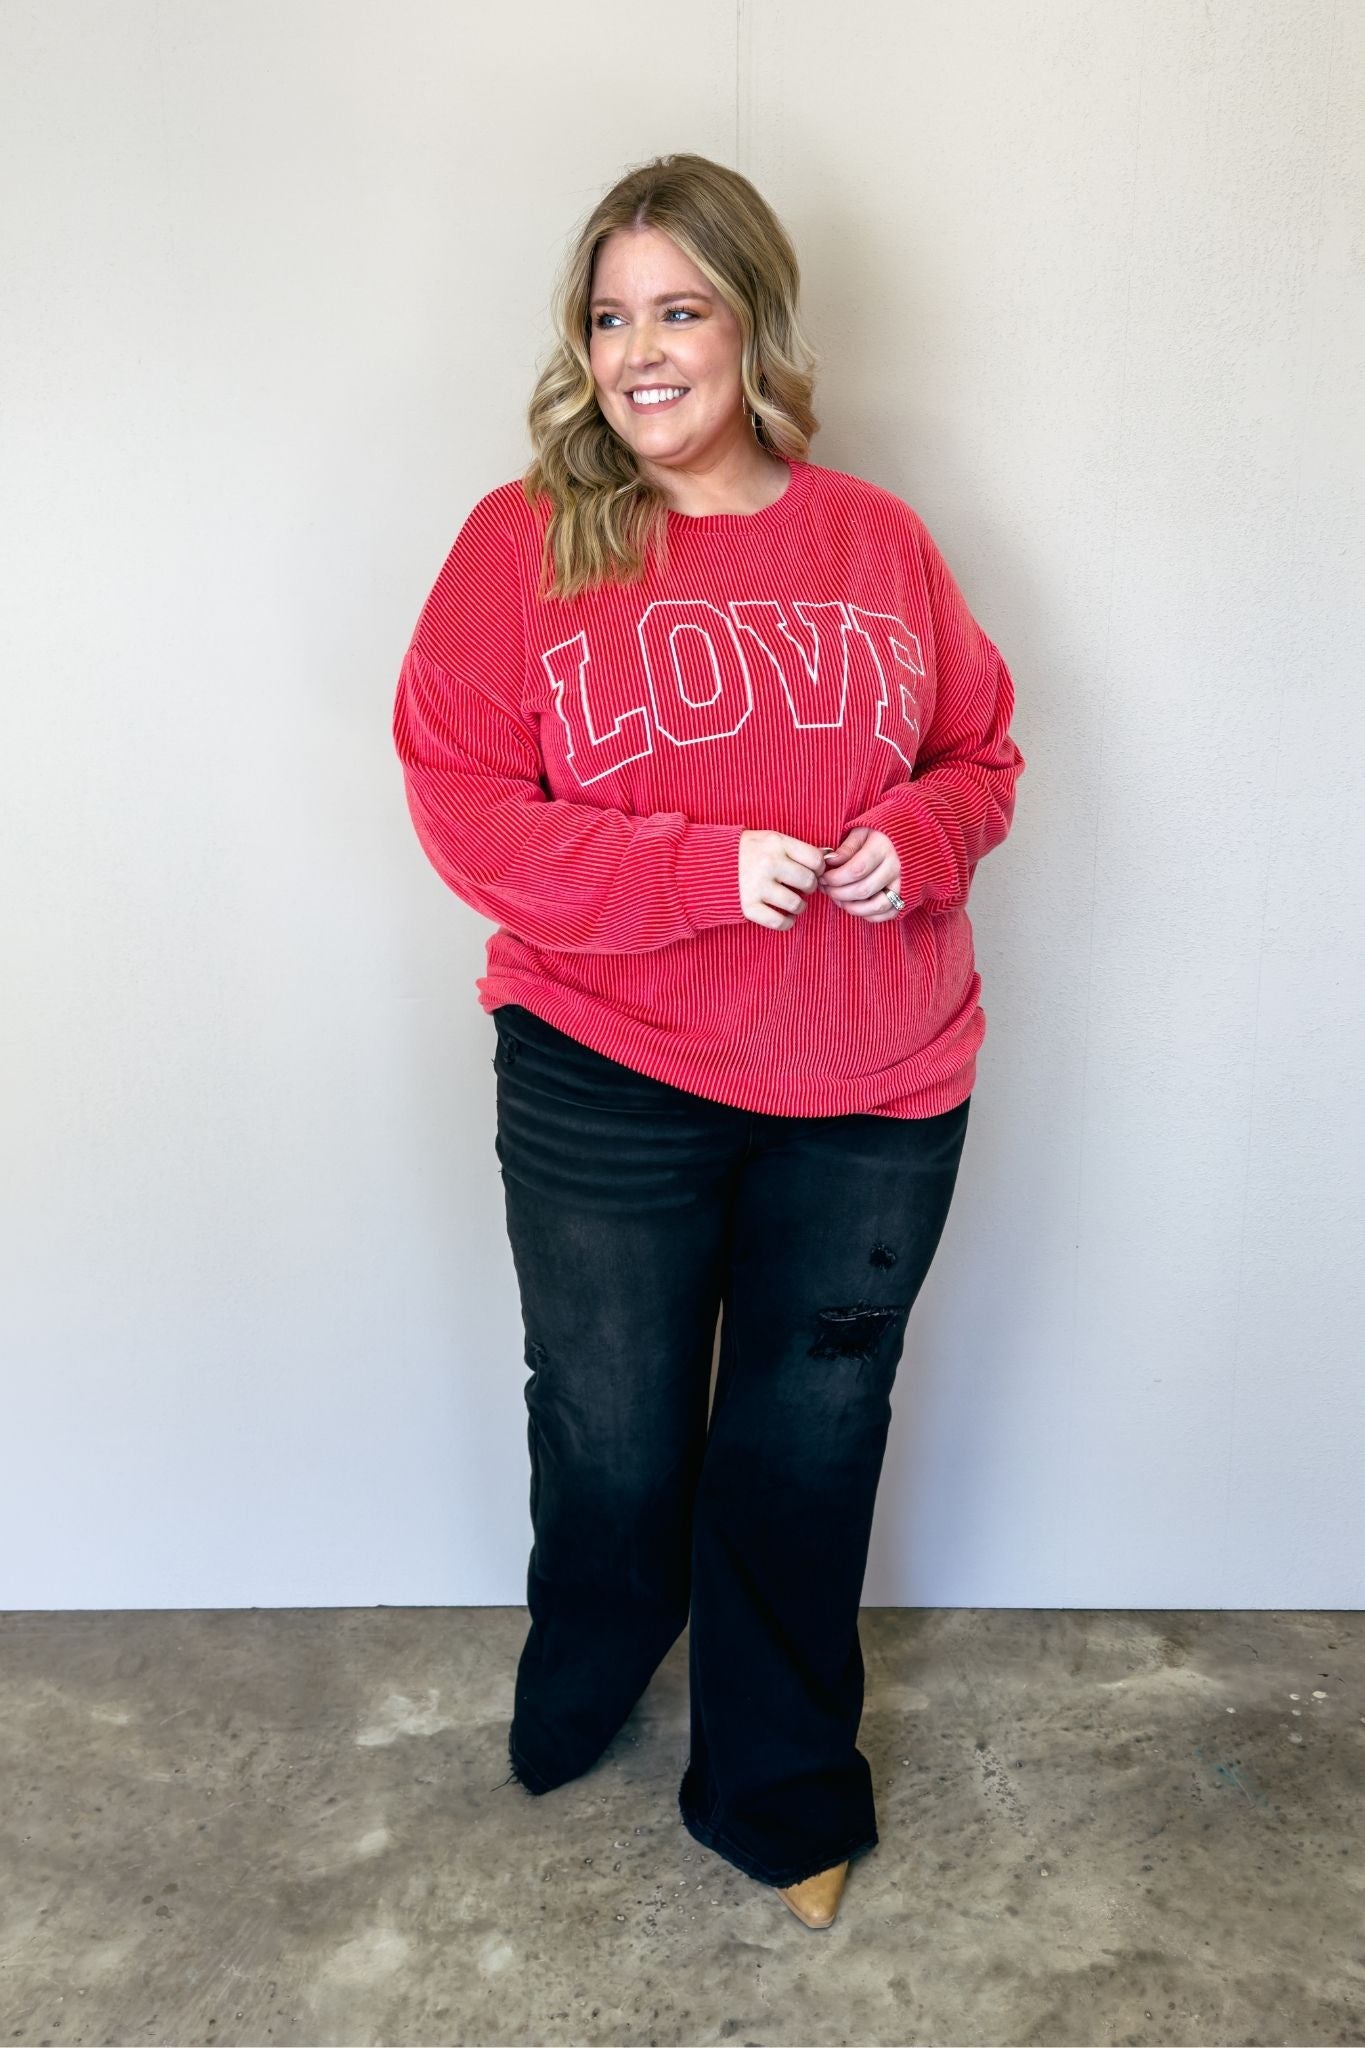 A cozy red sweater with the word "love" written on it. Perfect for spreading warmth and affection.